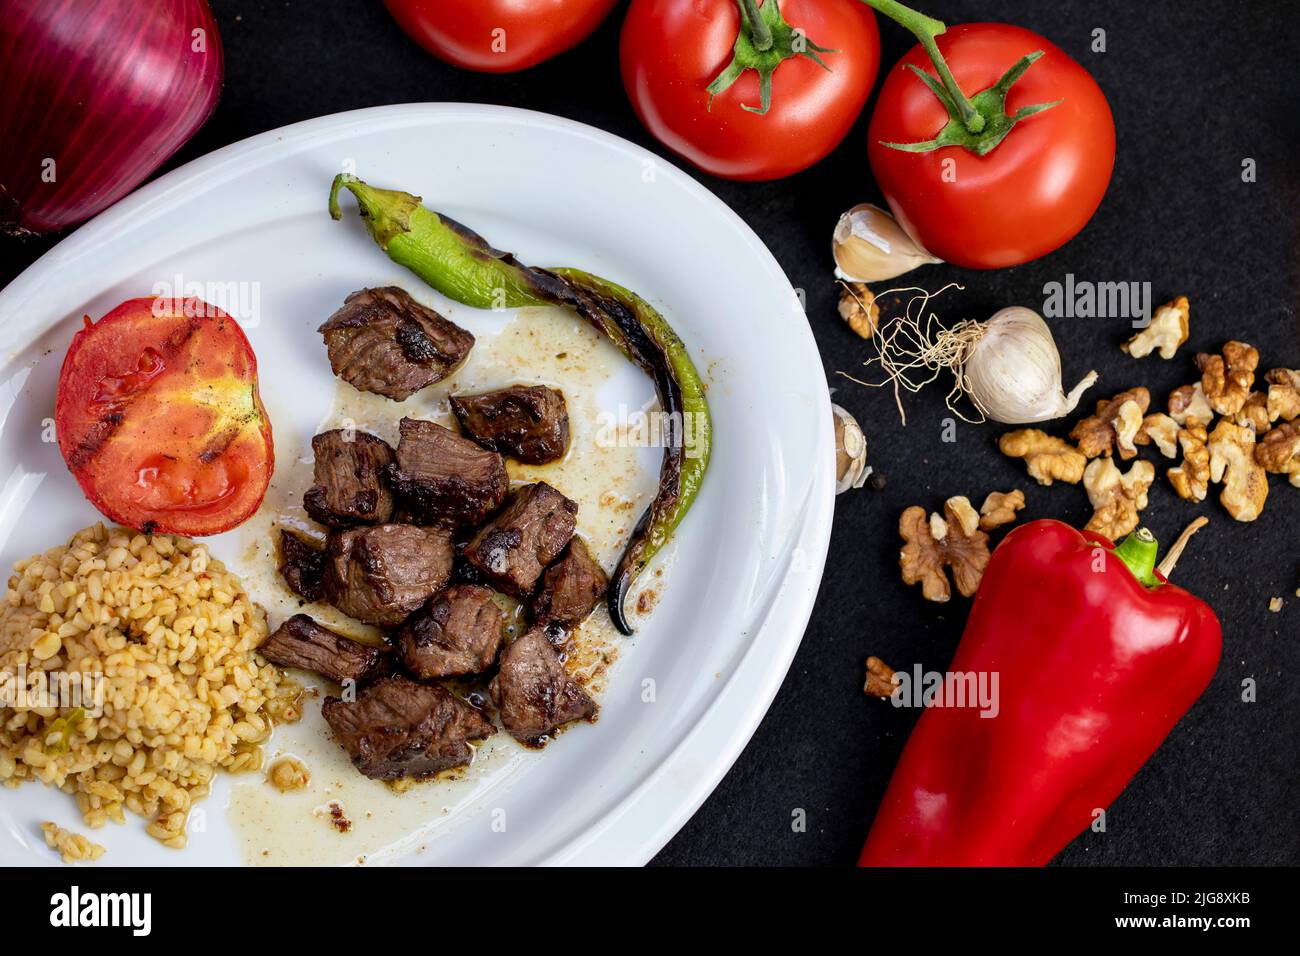 portions of cubed meat, served with tomatoes and roast vegetables on an plate Stock Photo